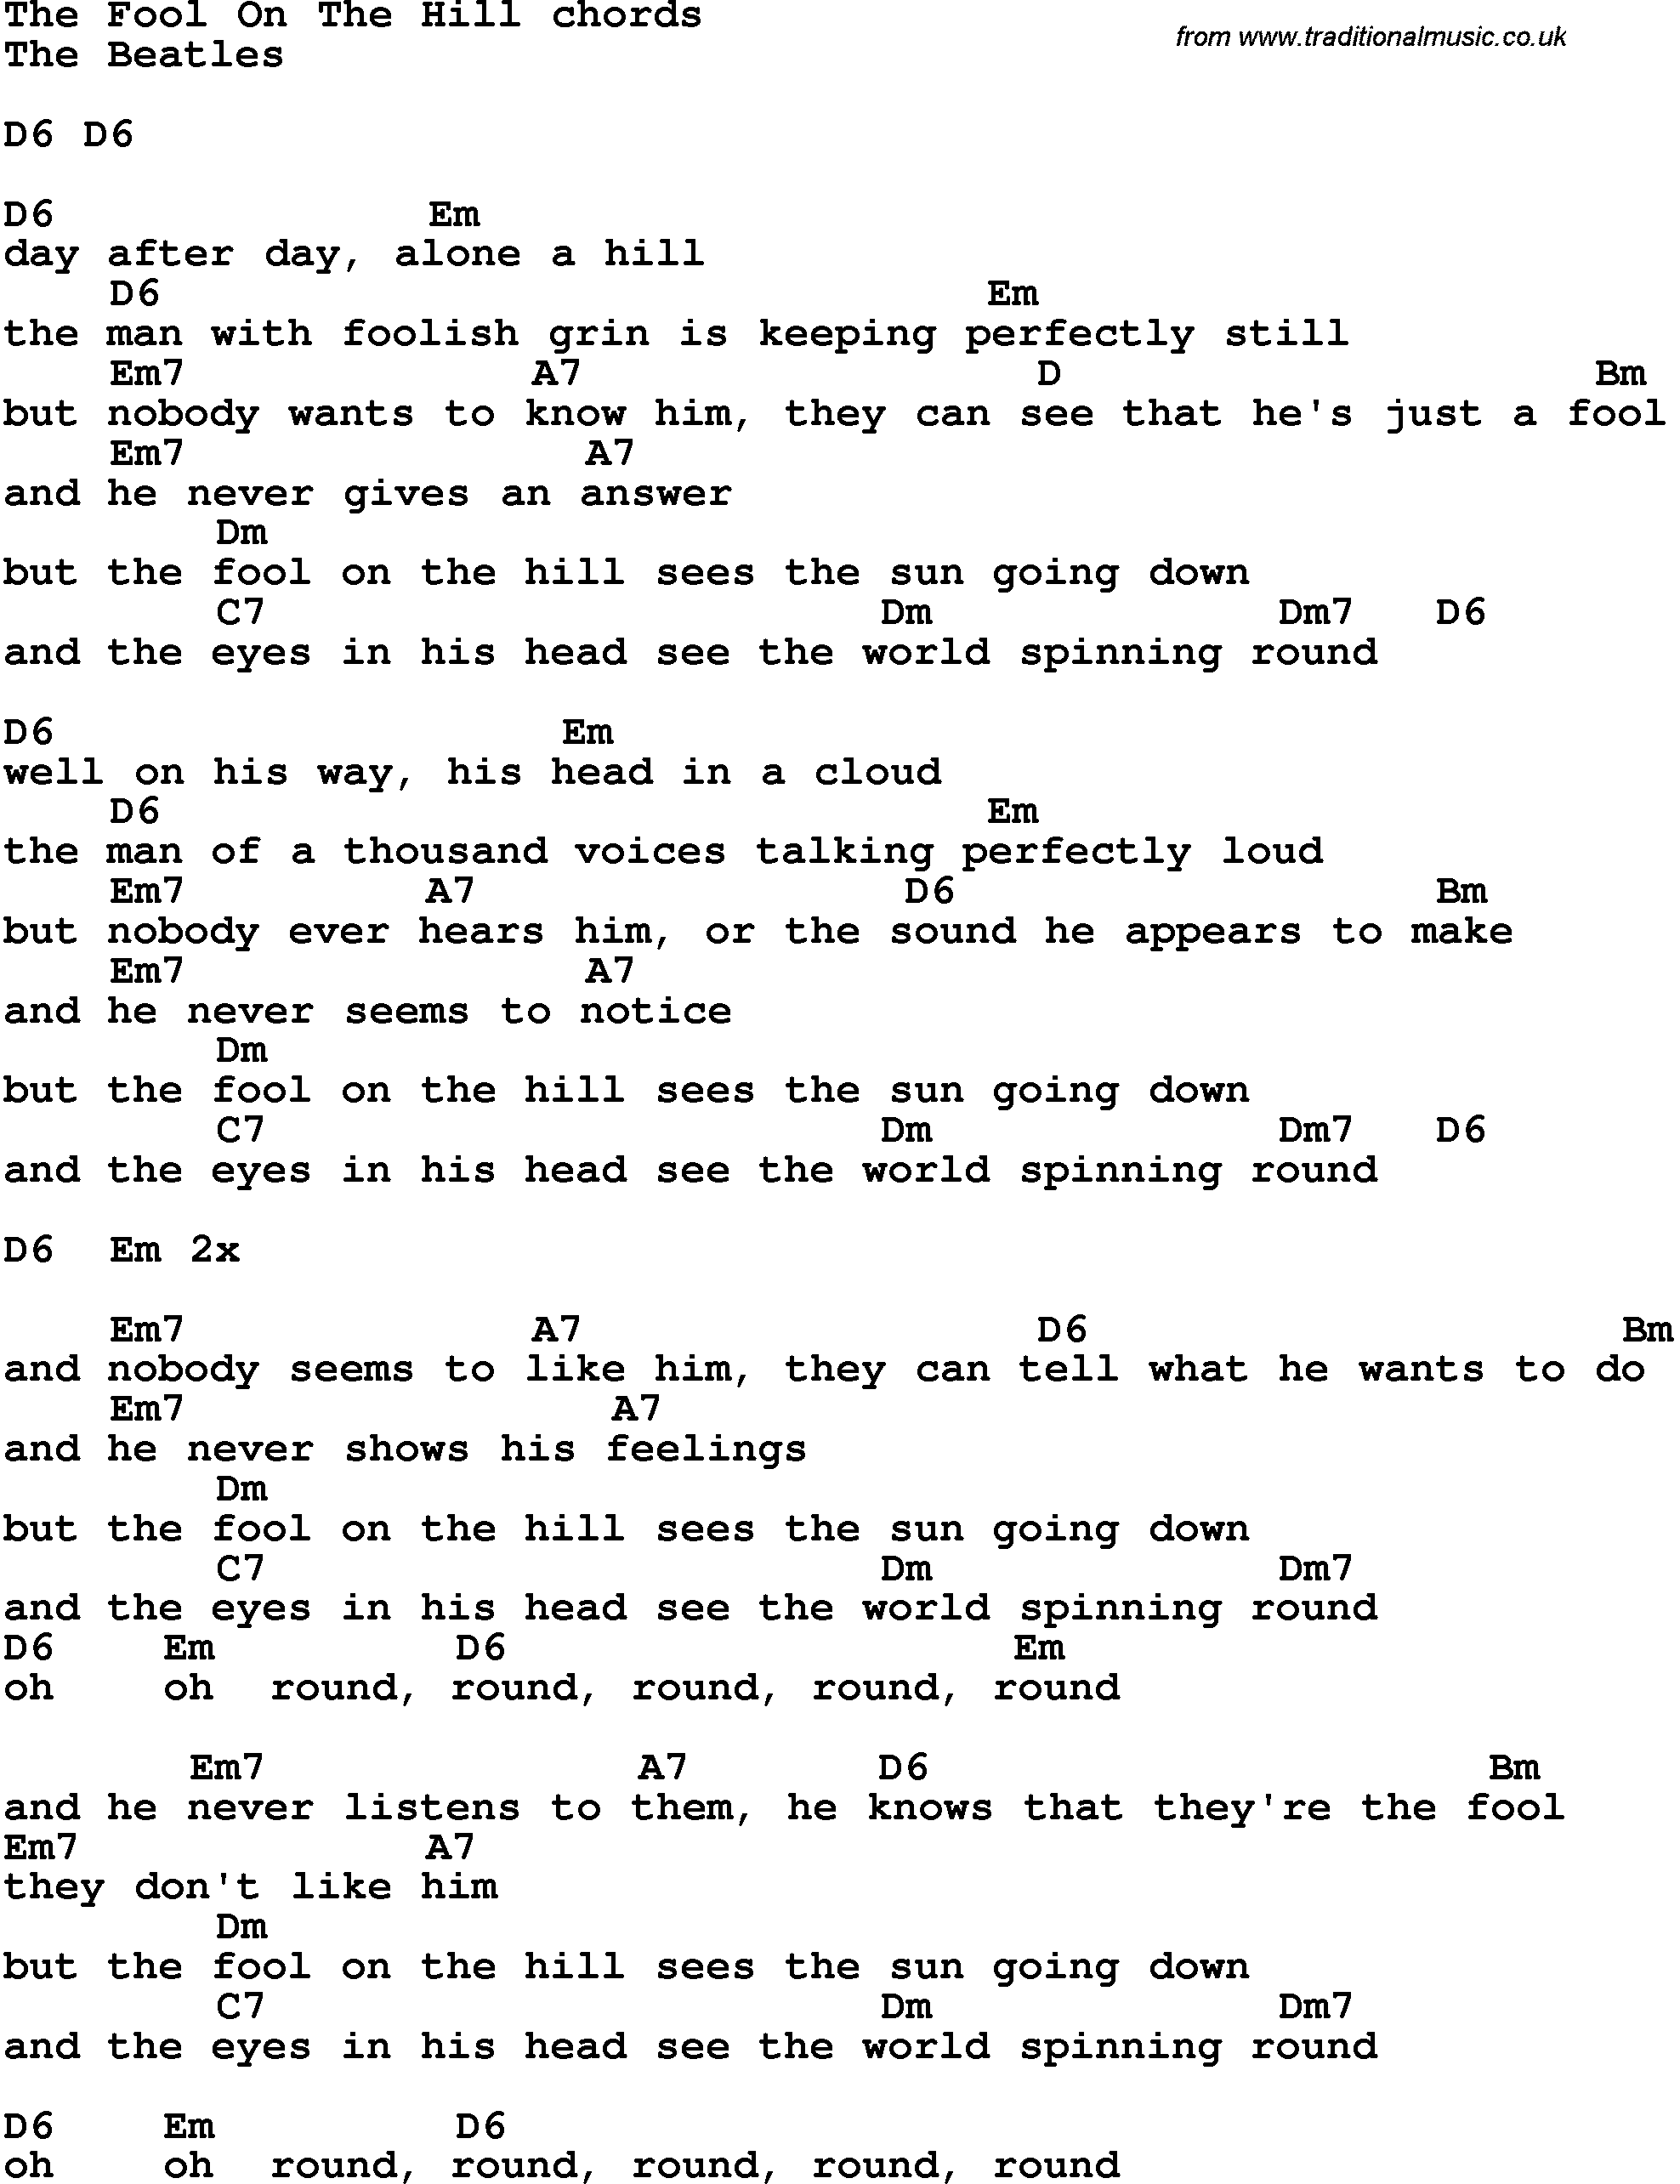 Song Lyrics with guitar chords for The Fool On The Hill - The Beatles